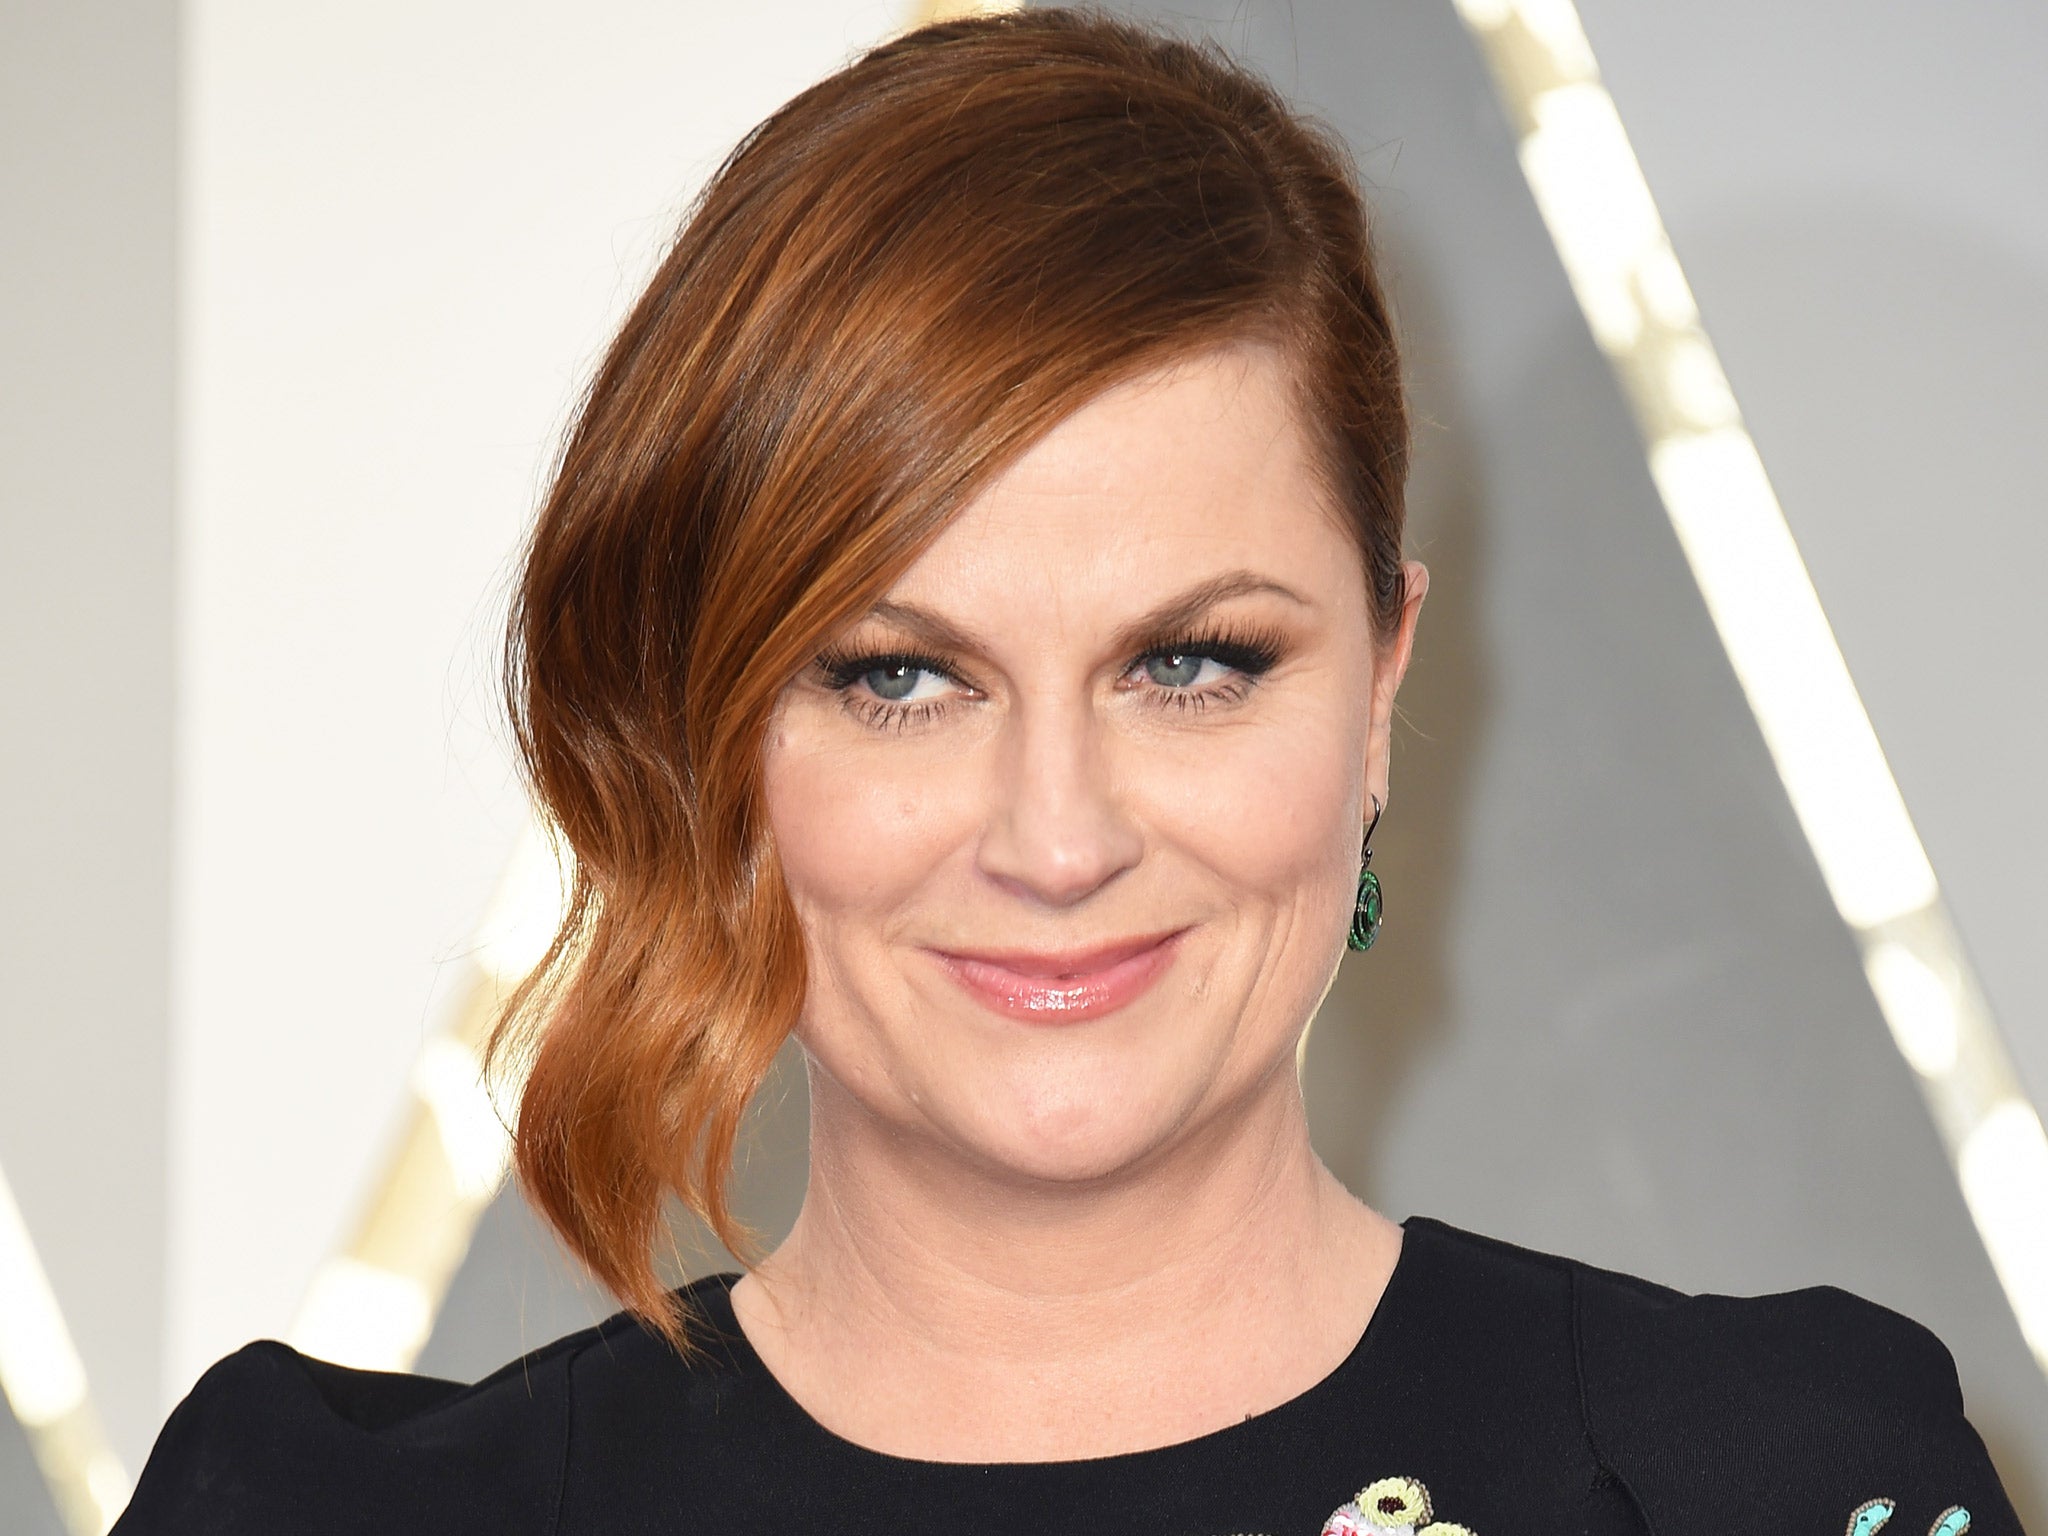 Comic actor Amy Poehler used more than 170,000 gallons of water at one of her properties over a two-month period last summer